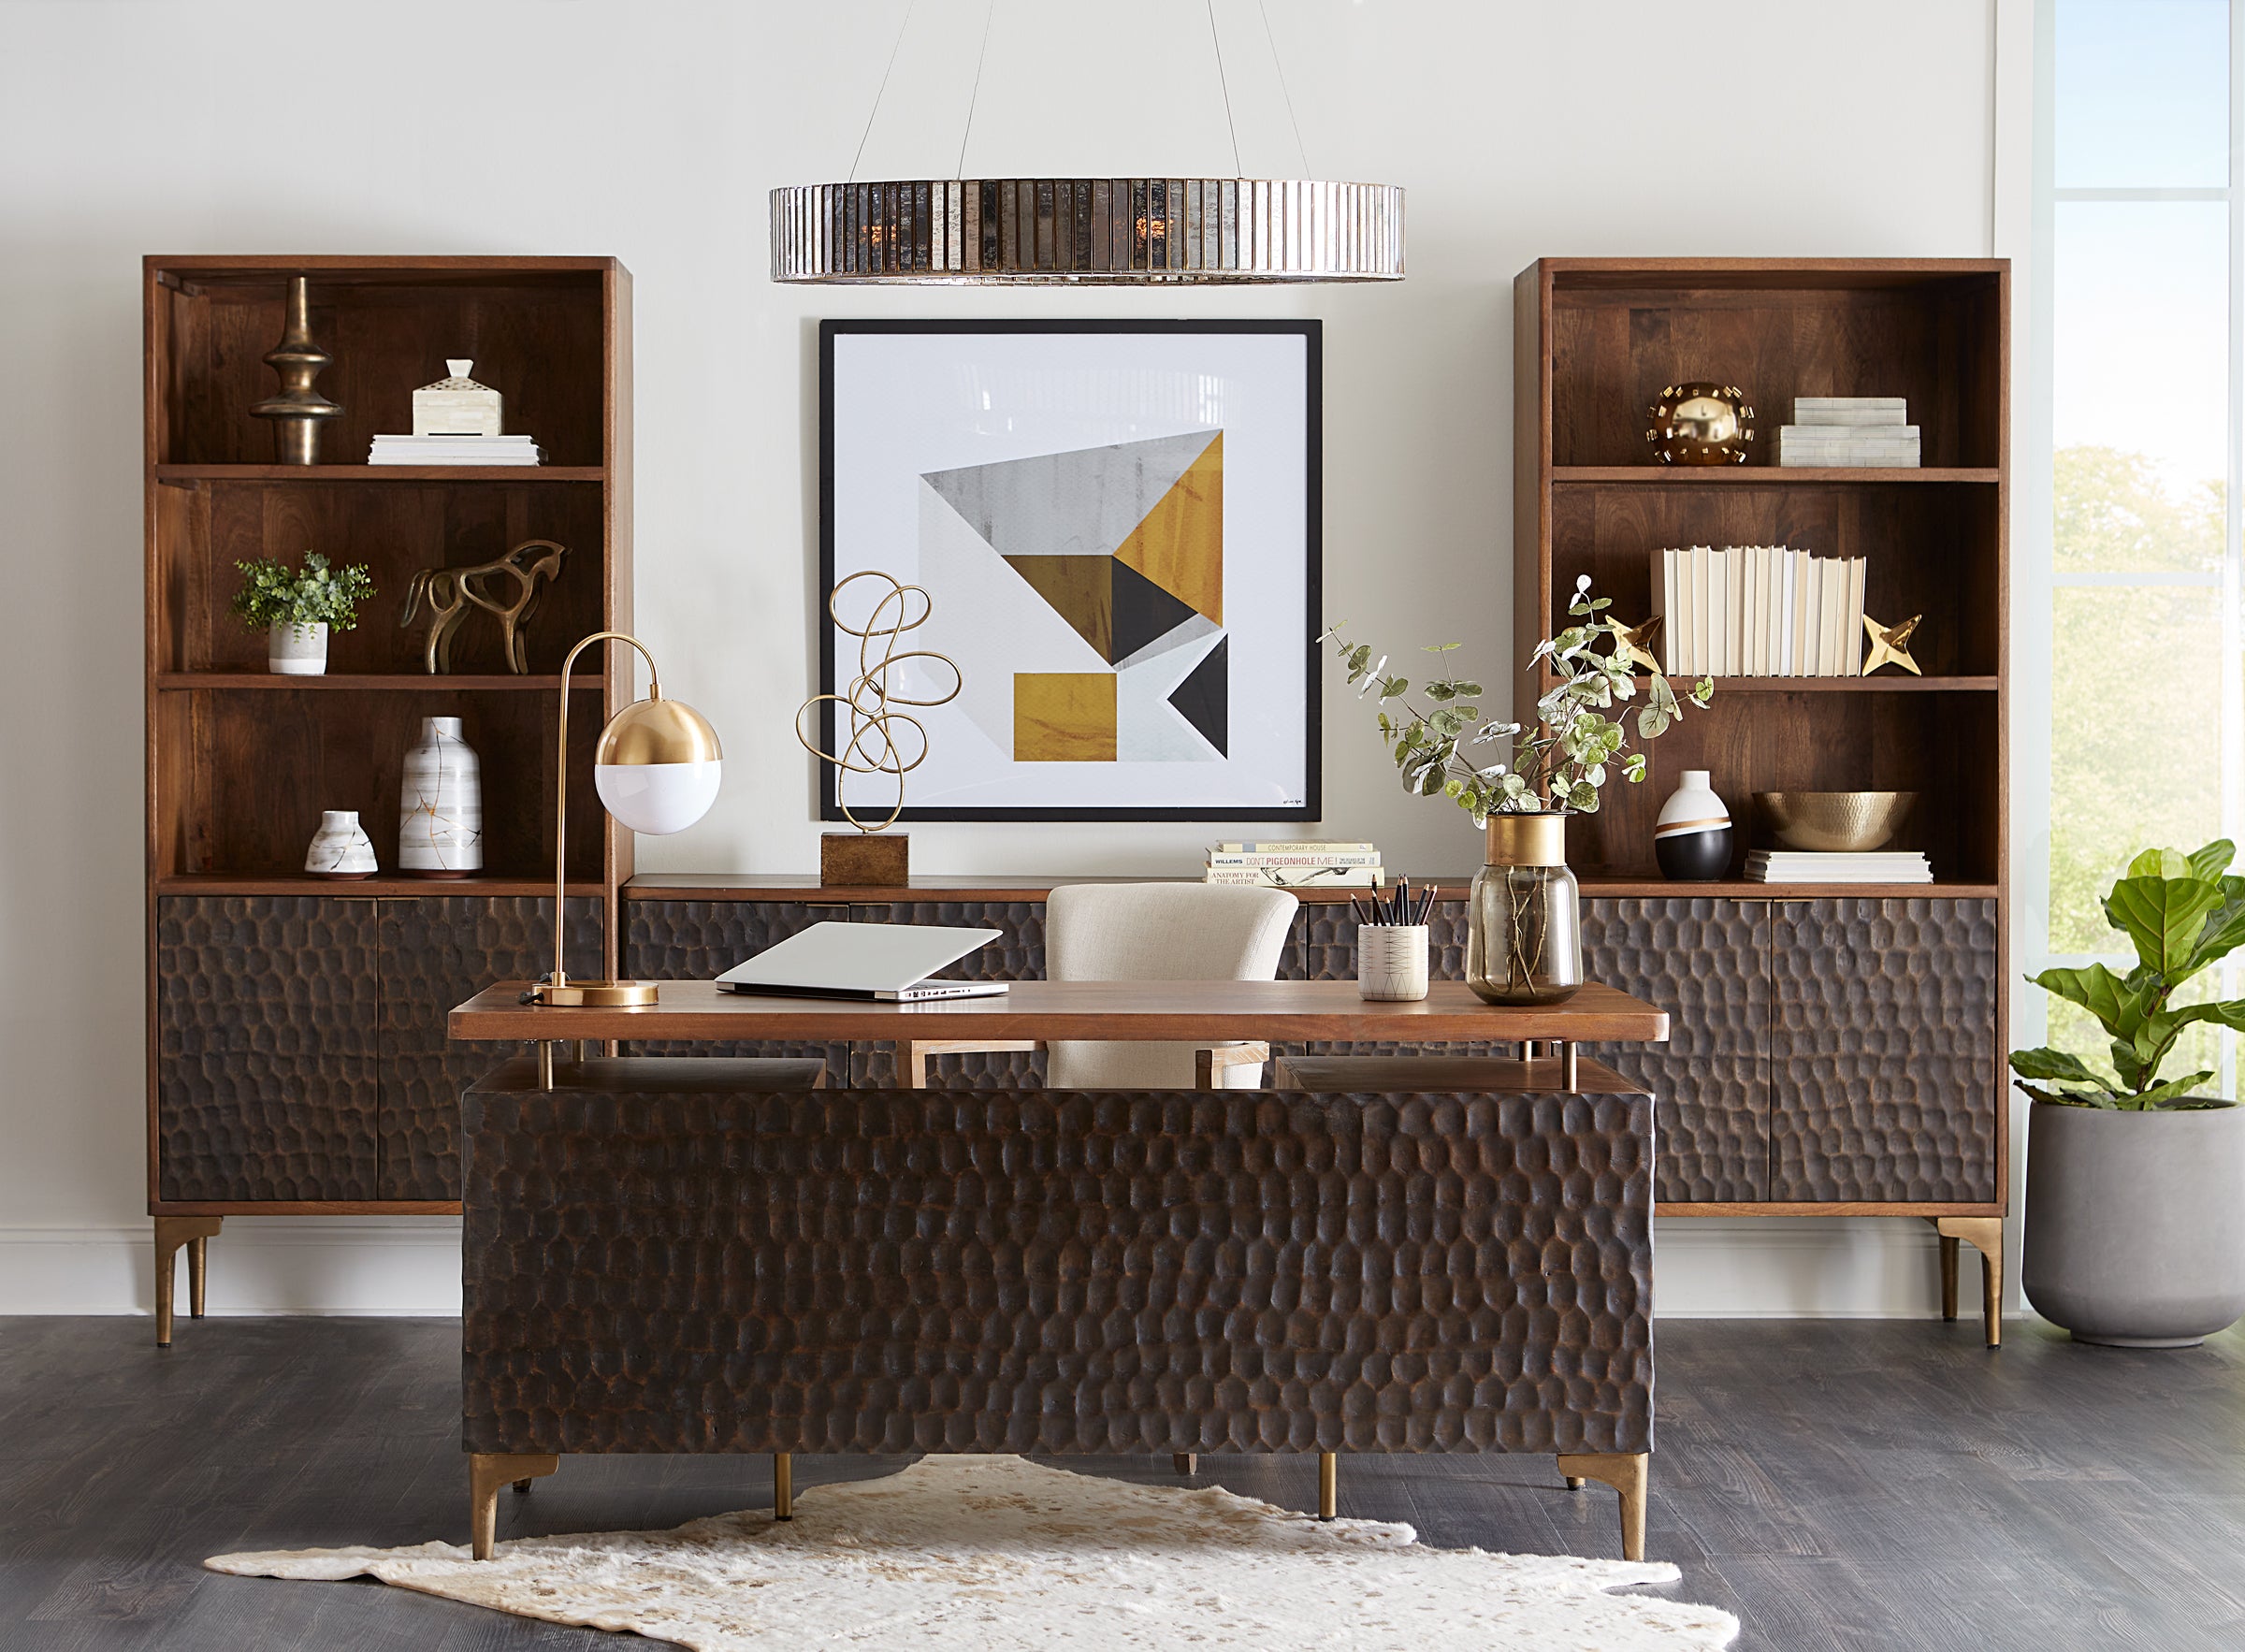 Mid-Century Modern Furniture: What's Your Style?